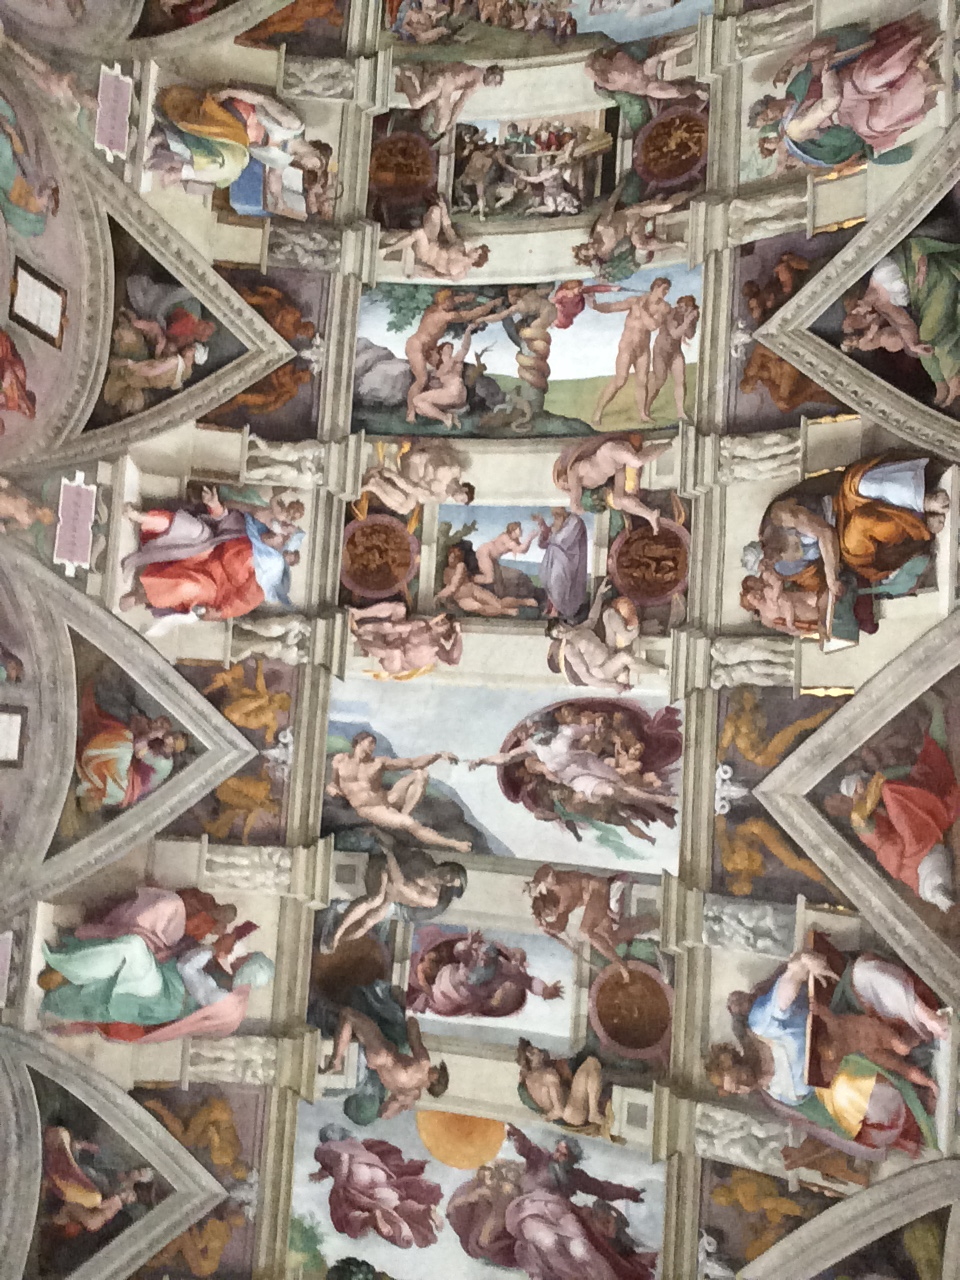 Ceiling of the Sistine Chapel -- I couldn't resist, I was discreet, I promise!